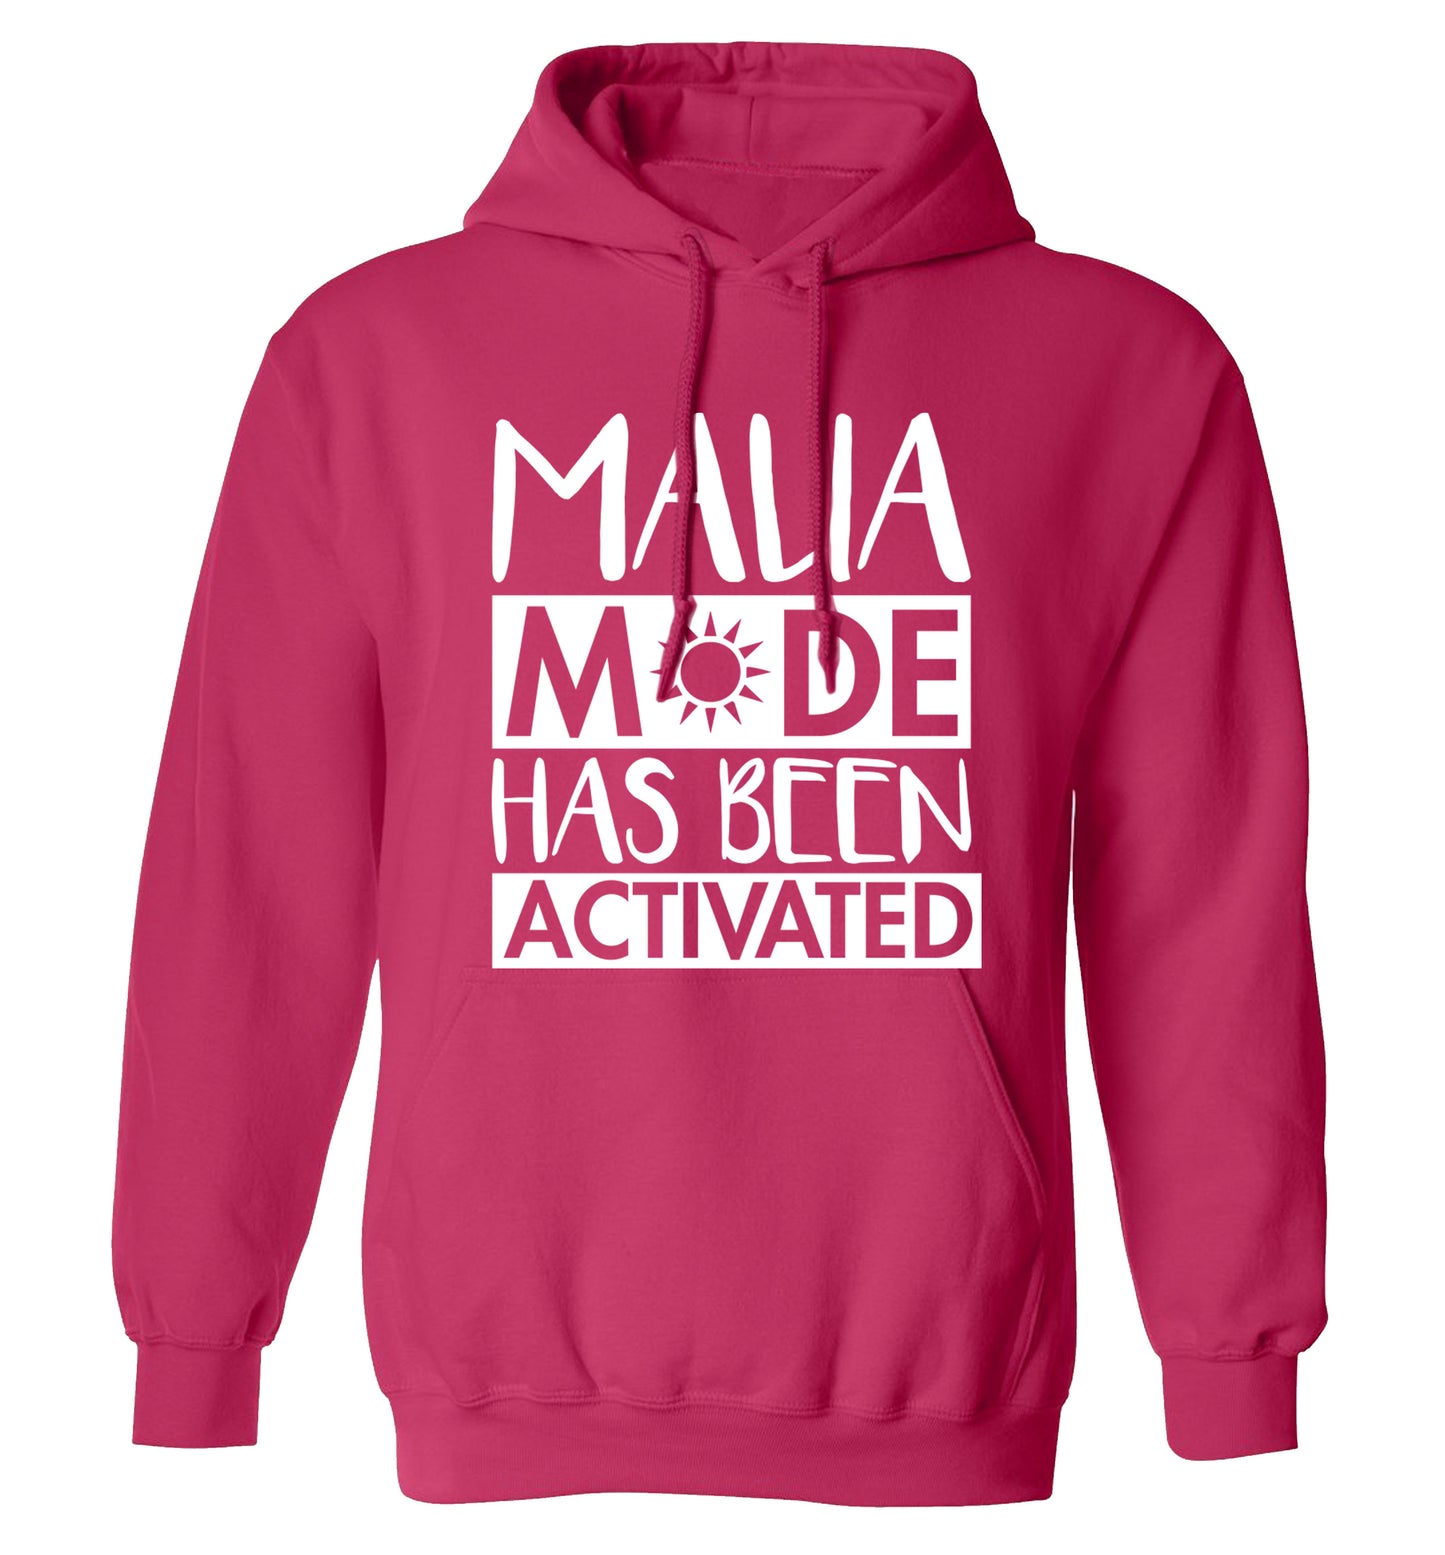 Malia mode has been activated adults unisex pink hoodie 2XL